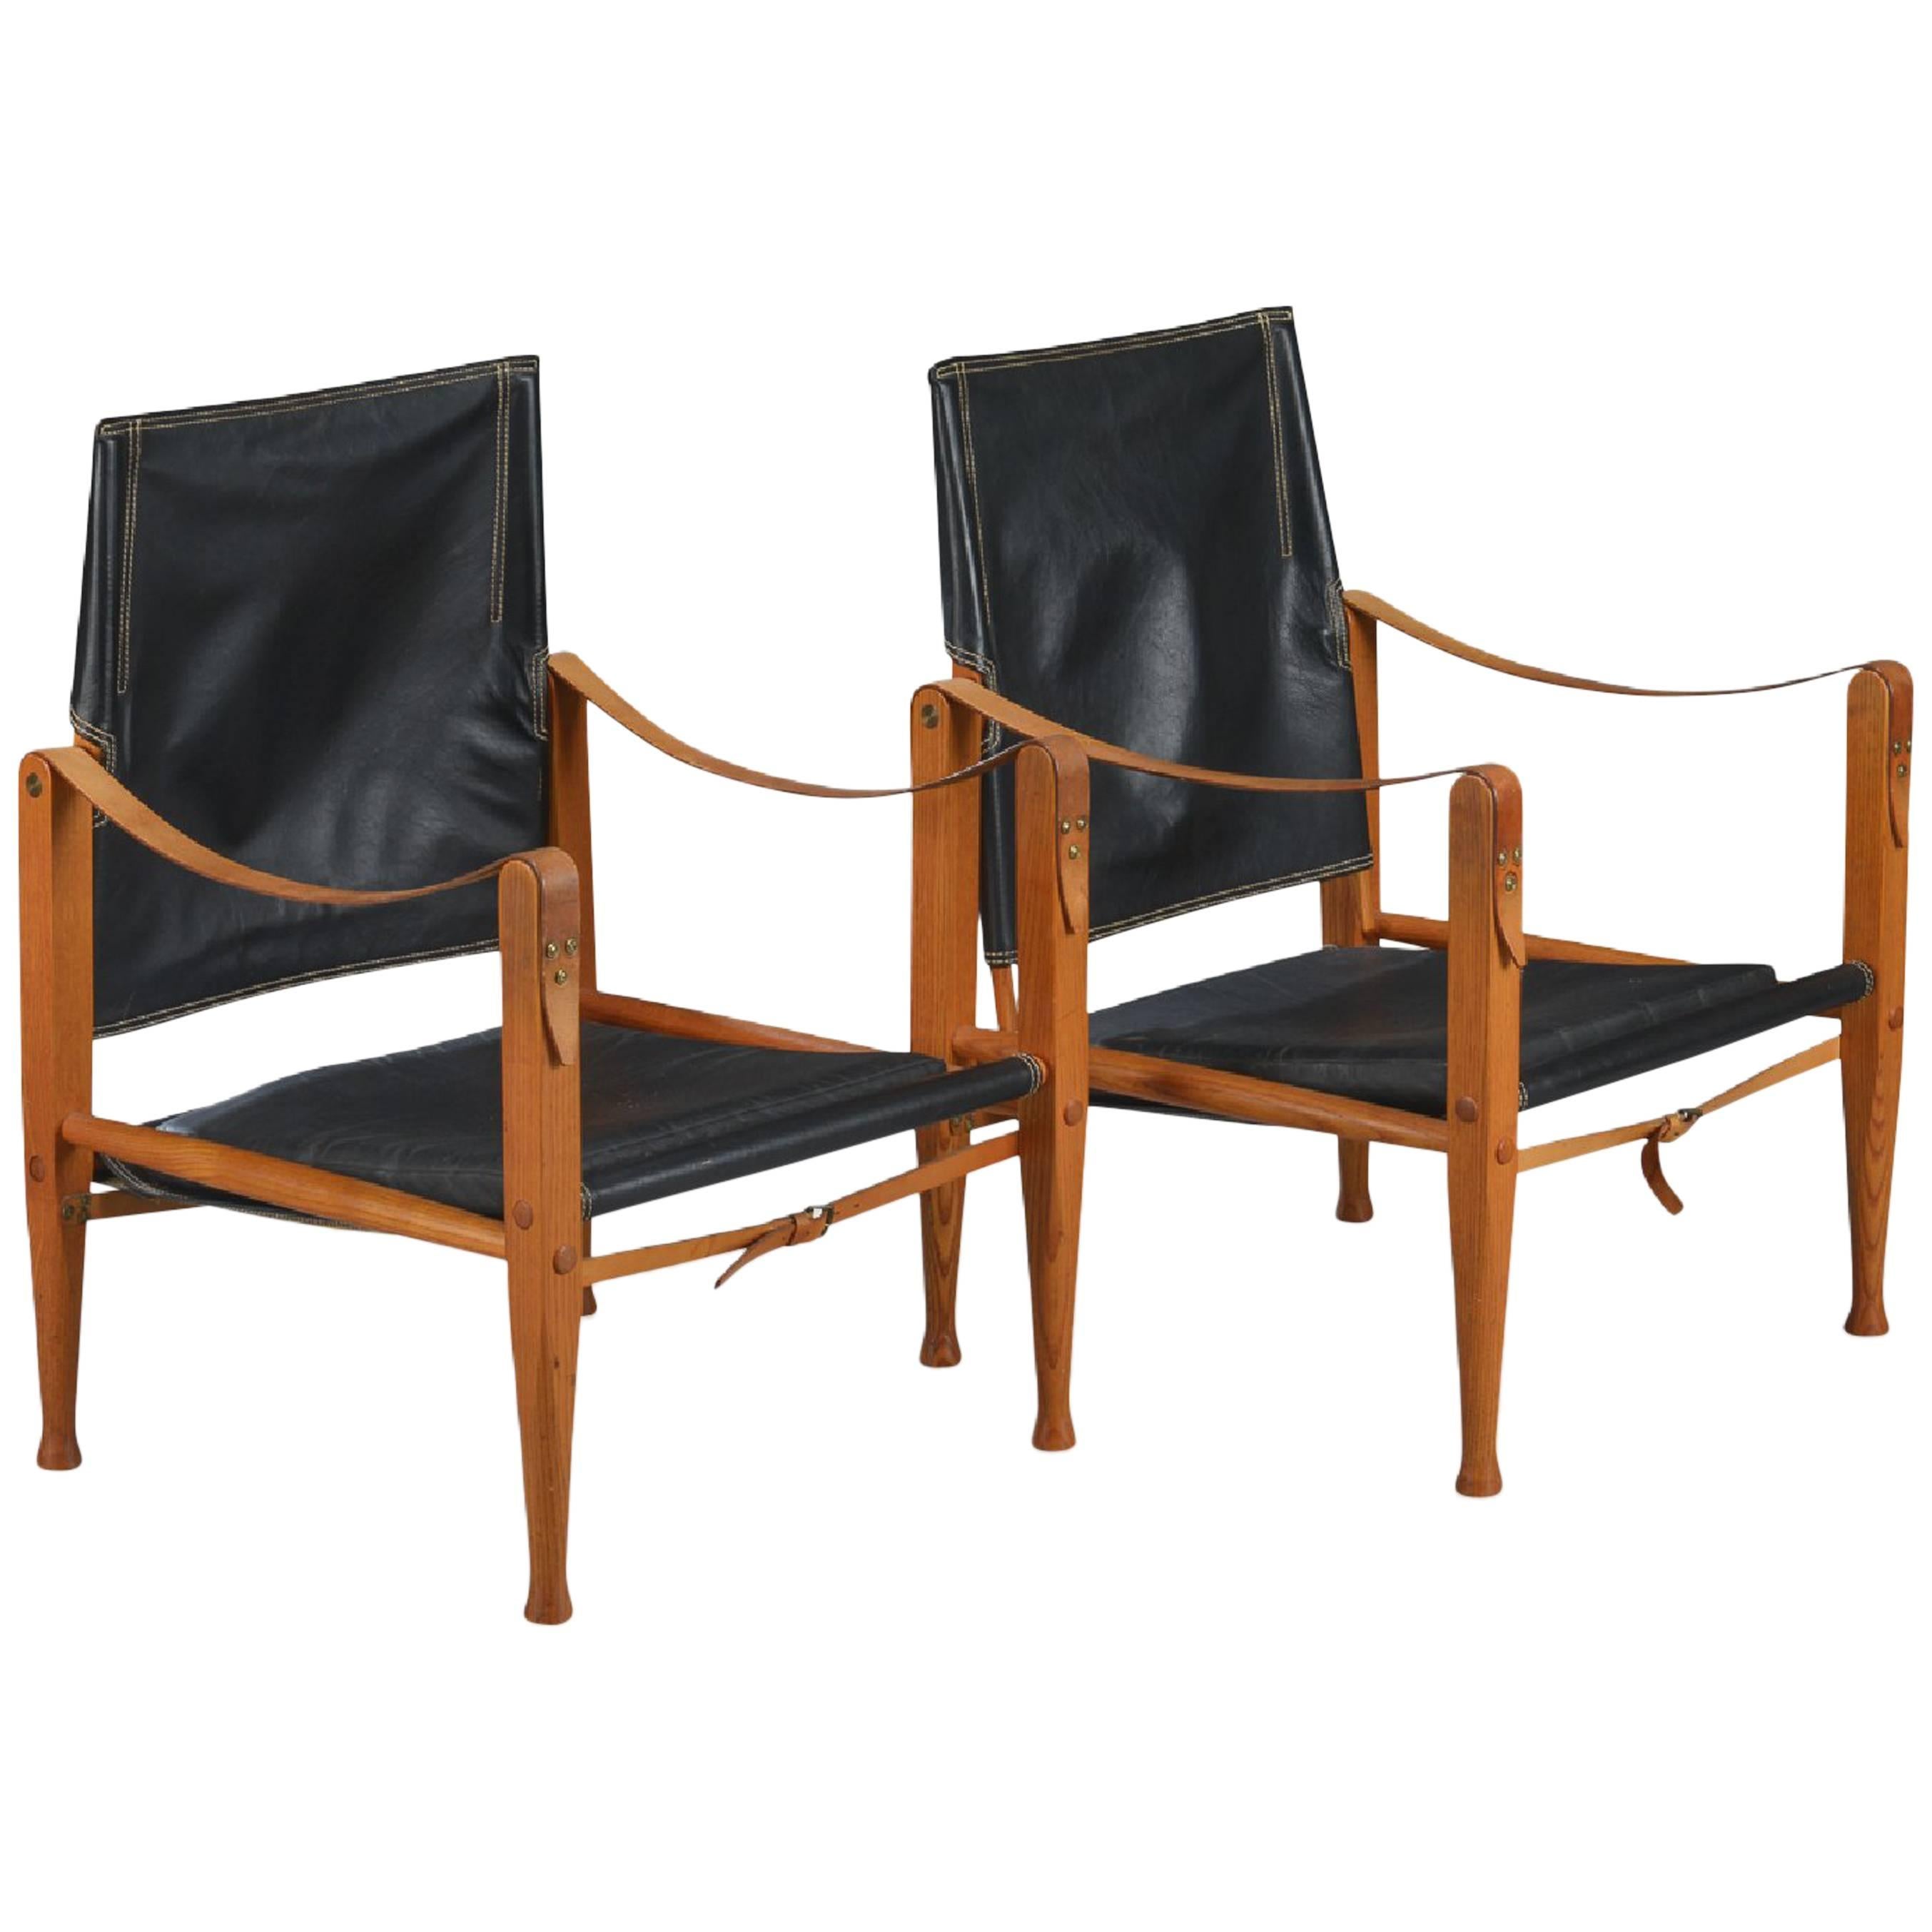 A pair of Kaare Klint Safari chairs, made by Rud Rasmussen, Denmark. Black leather and ashwood.